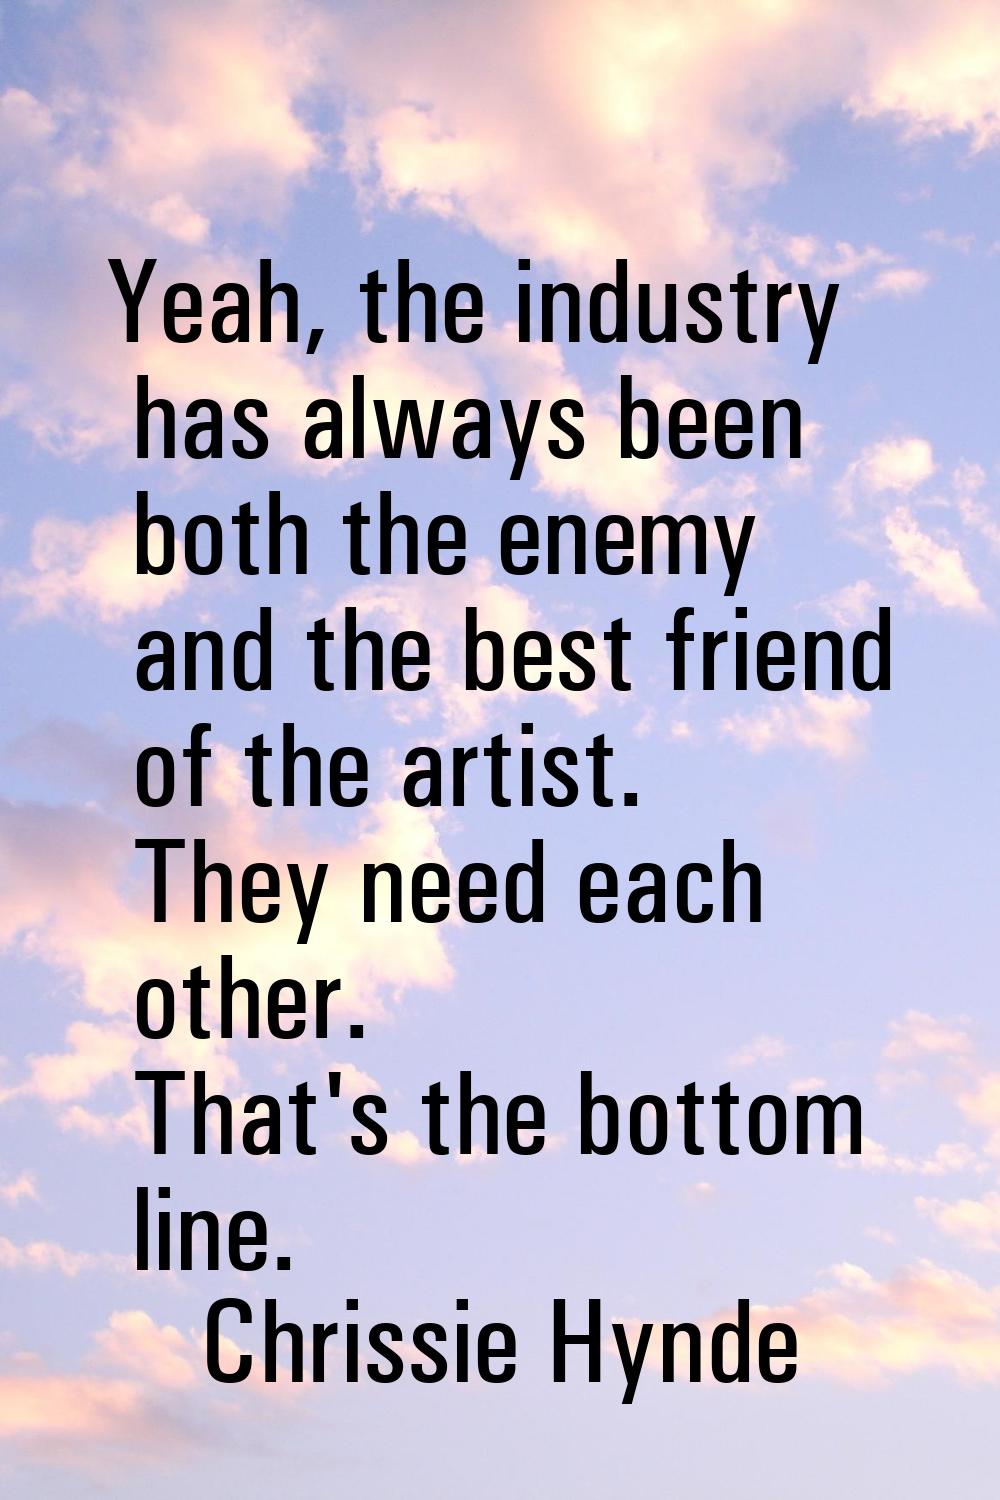 Yeah, the industry has always been both the enemy and the best friend of the artist. They need each